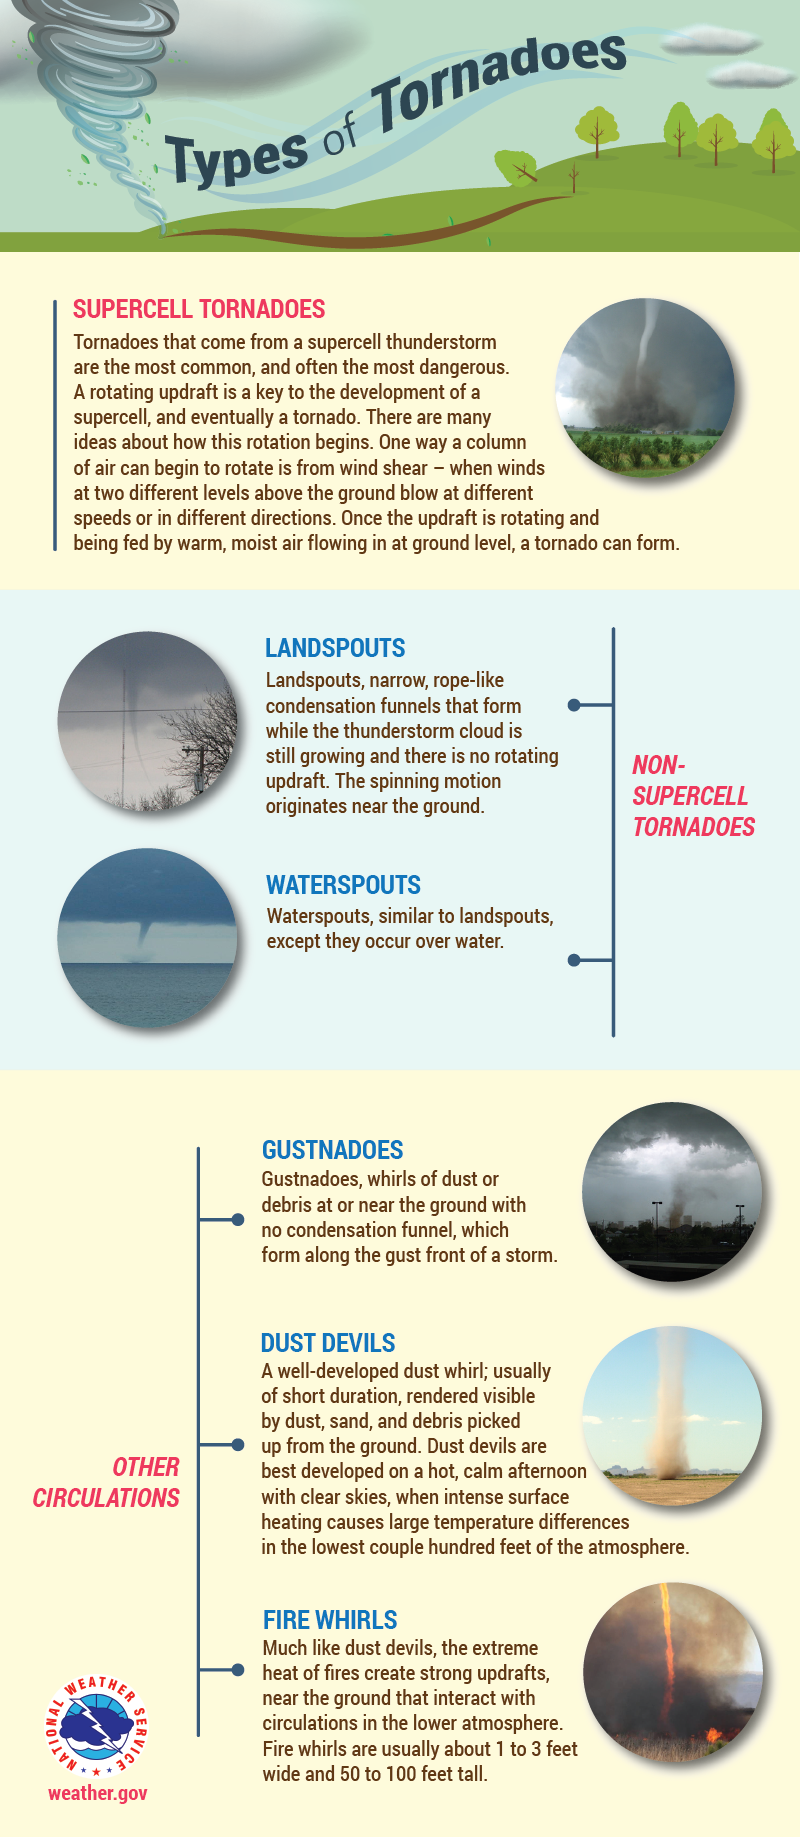 Types of Tornadoes?